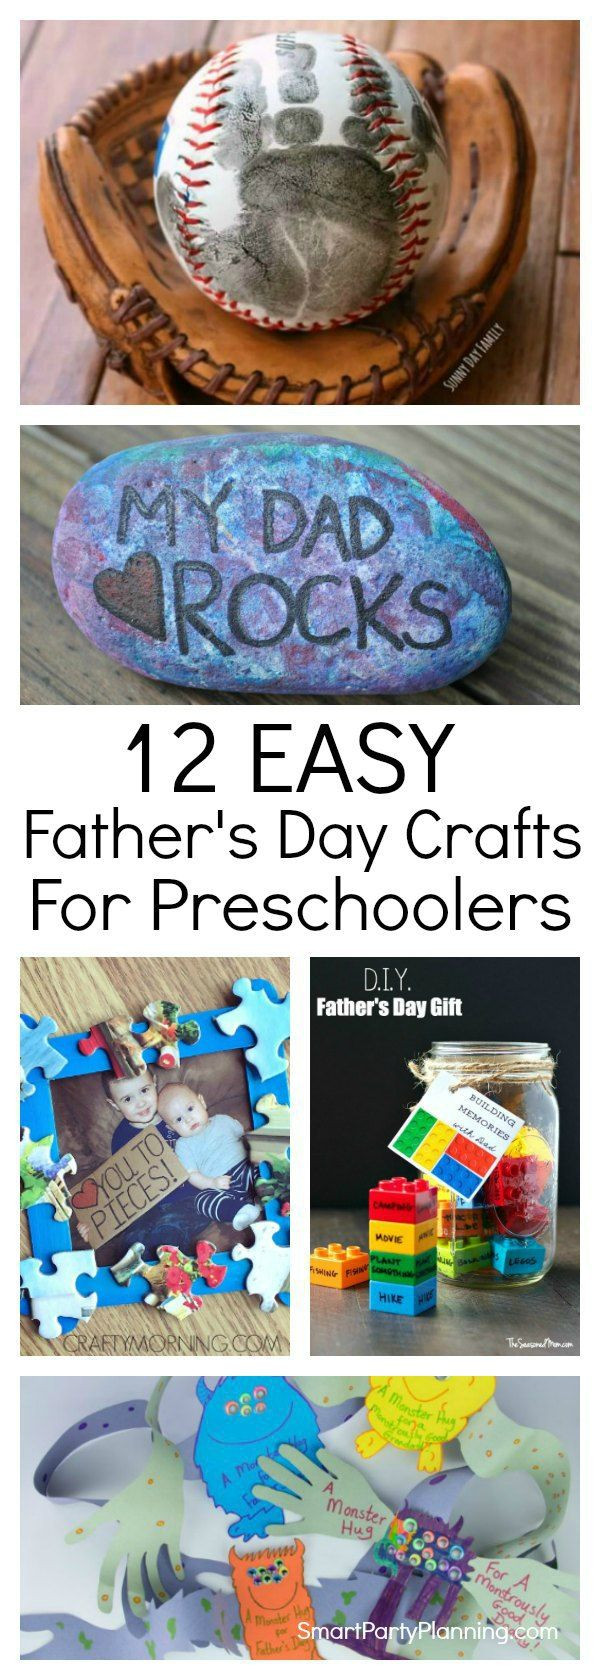 Fathers Day Gift Ideas For Preschool
 Best 25 Dad crafts ideas on Pinterest